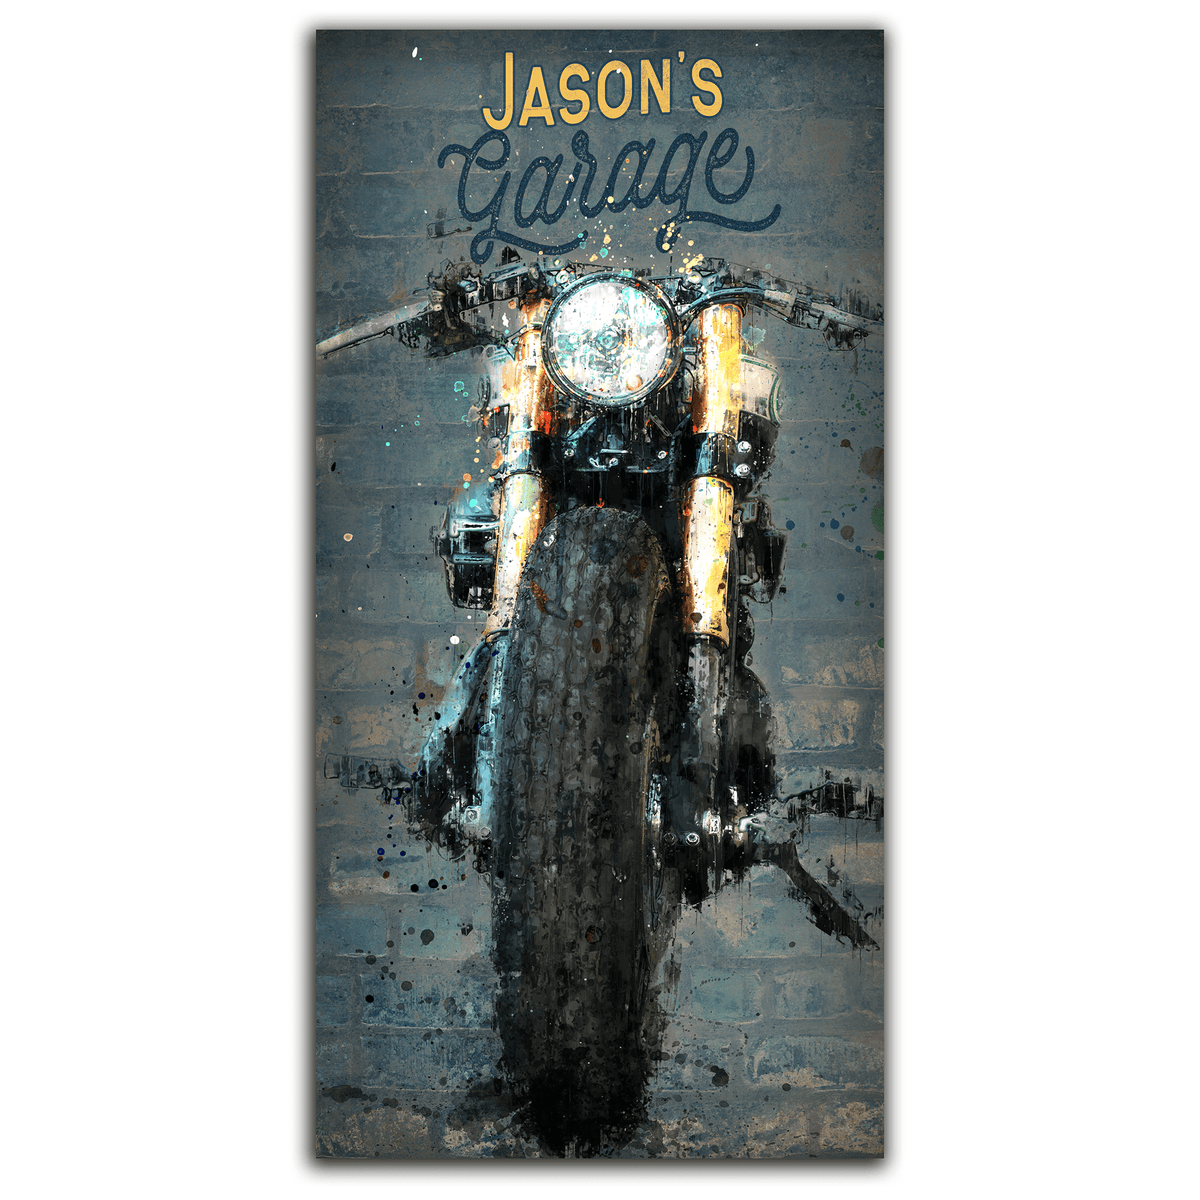 Personalized Motorcycle garage sign art from Personal-Prints